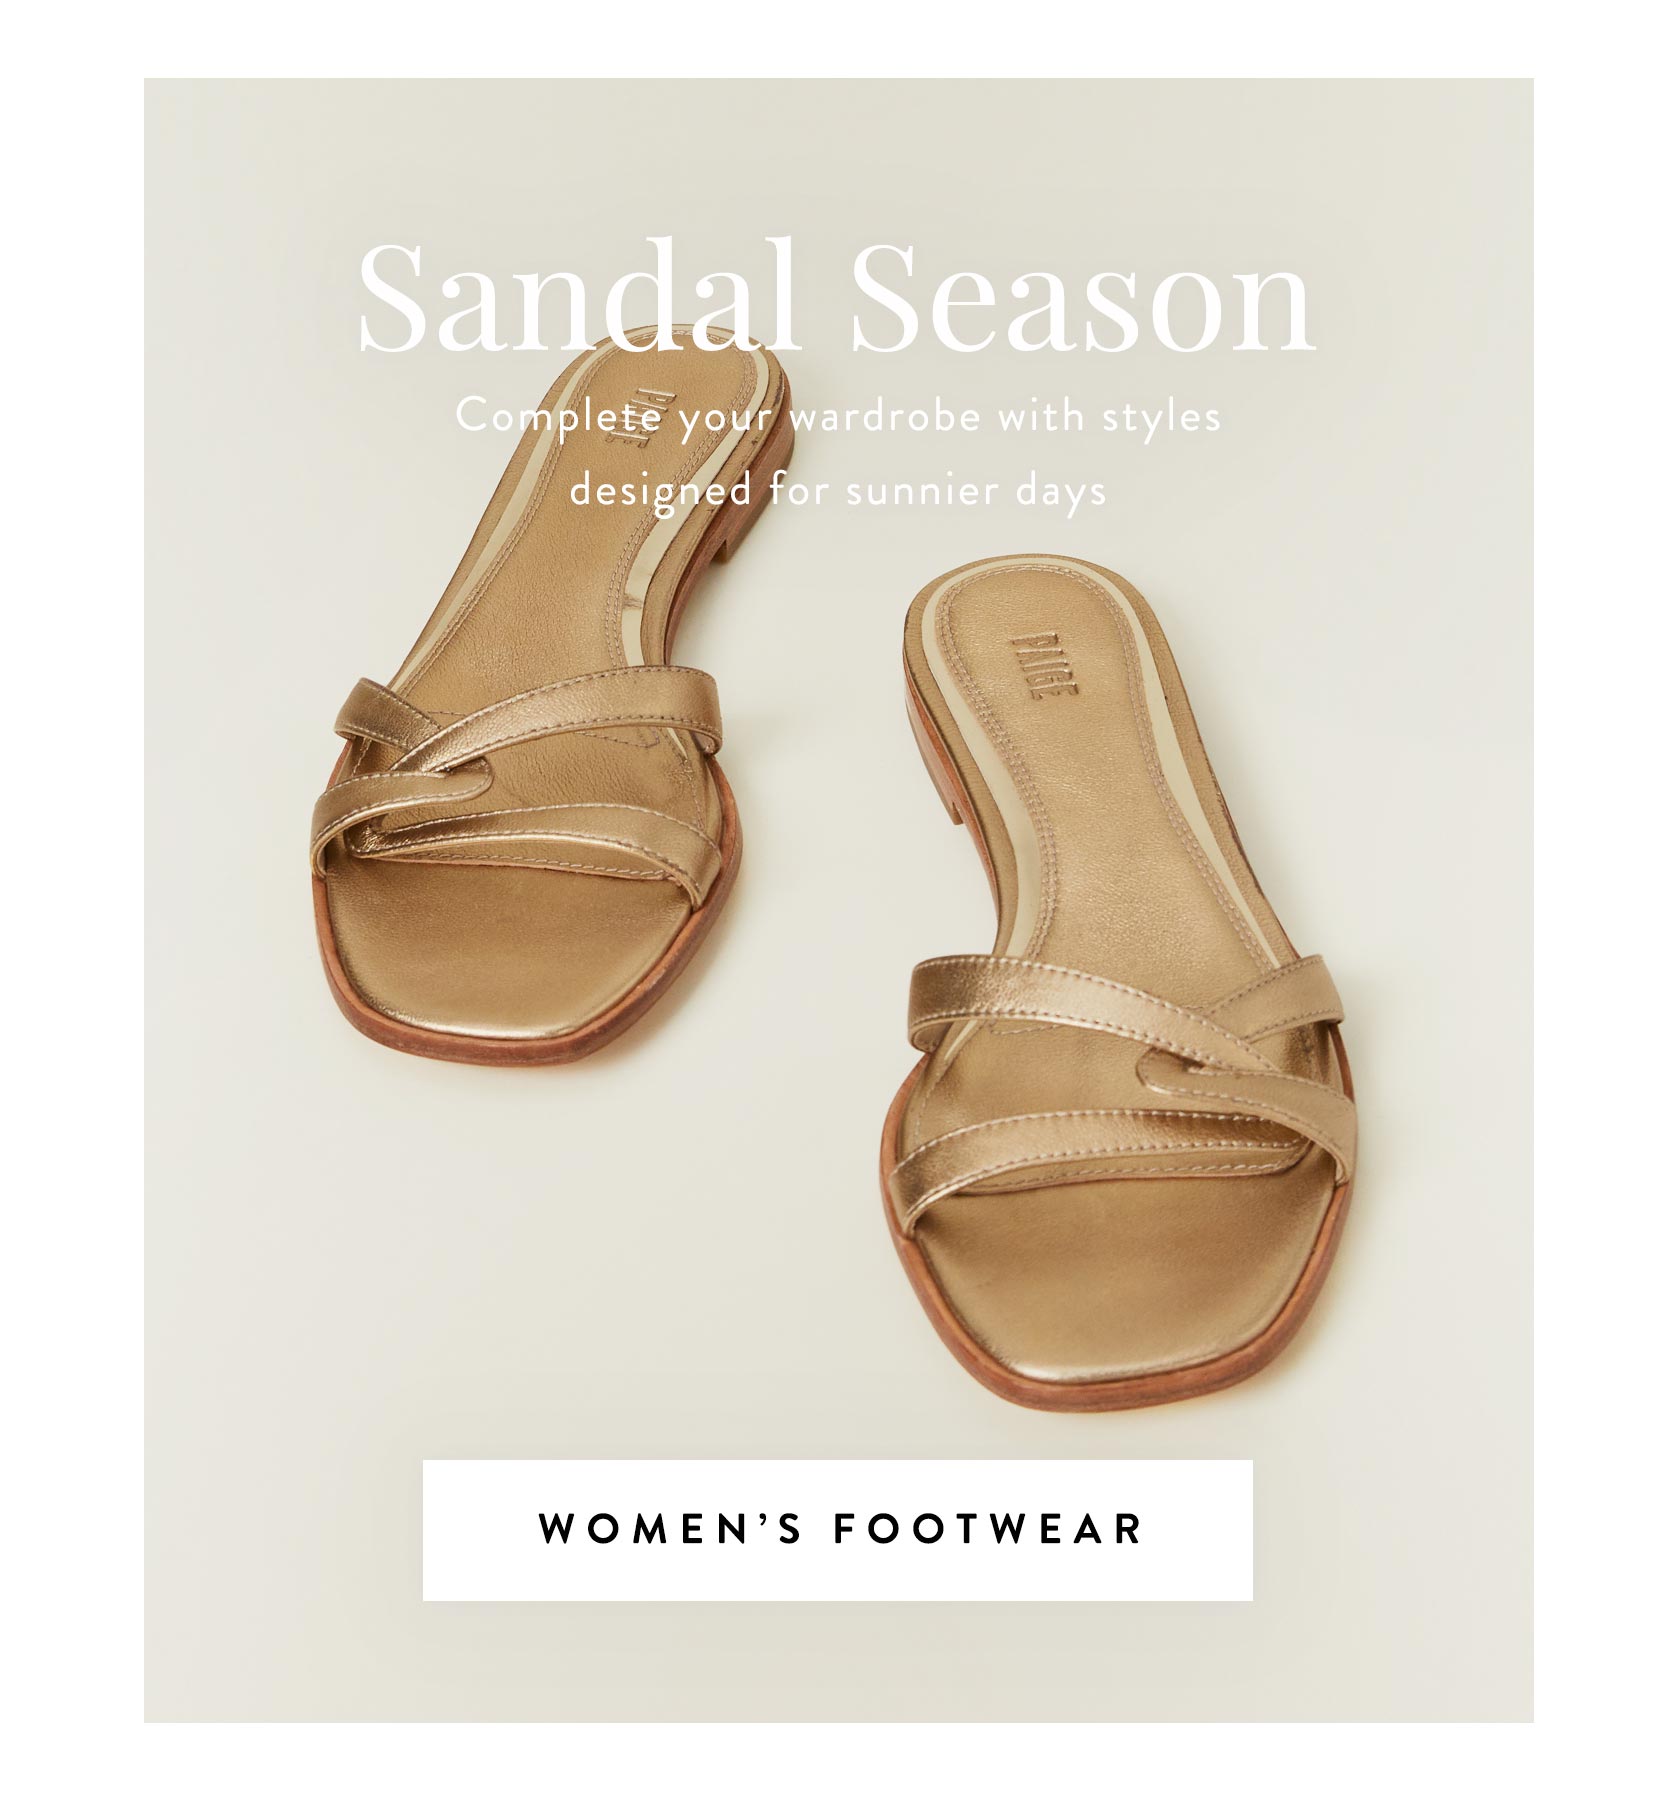 A pair of gold leather sandals sat side by side on a cream colored floor